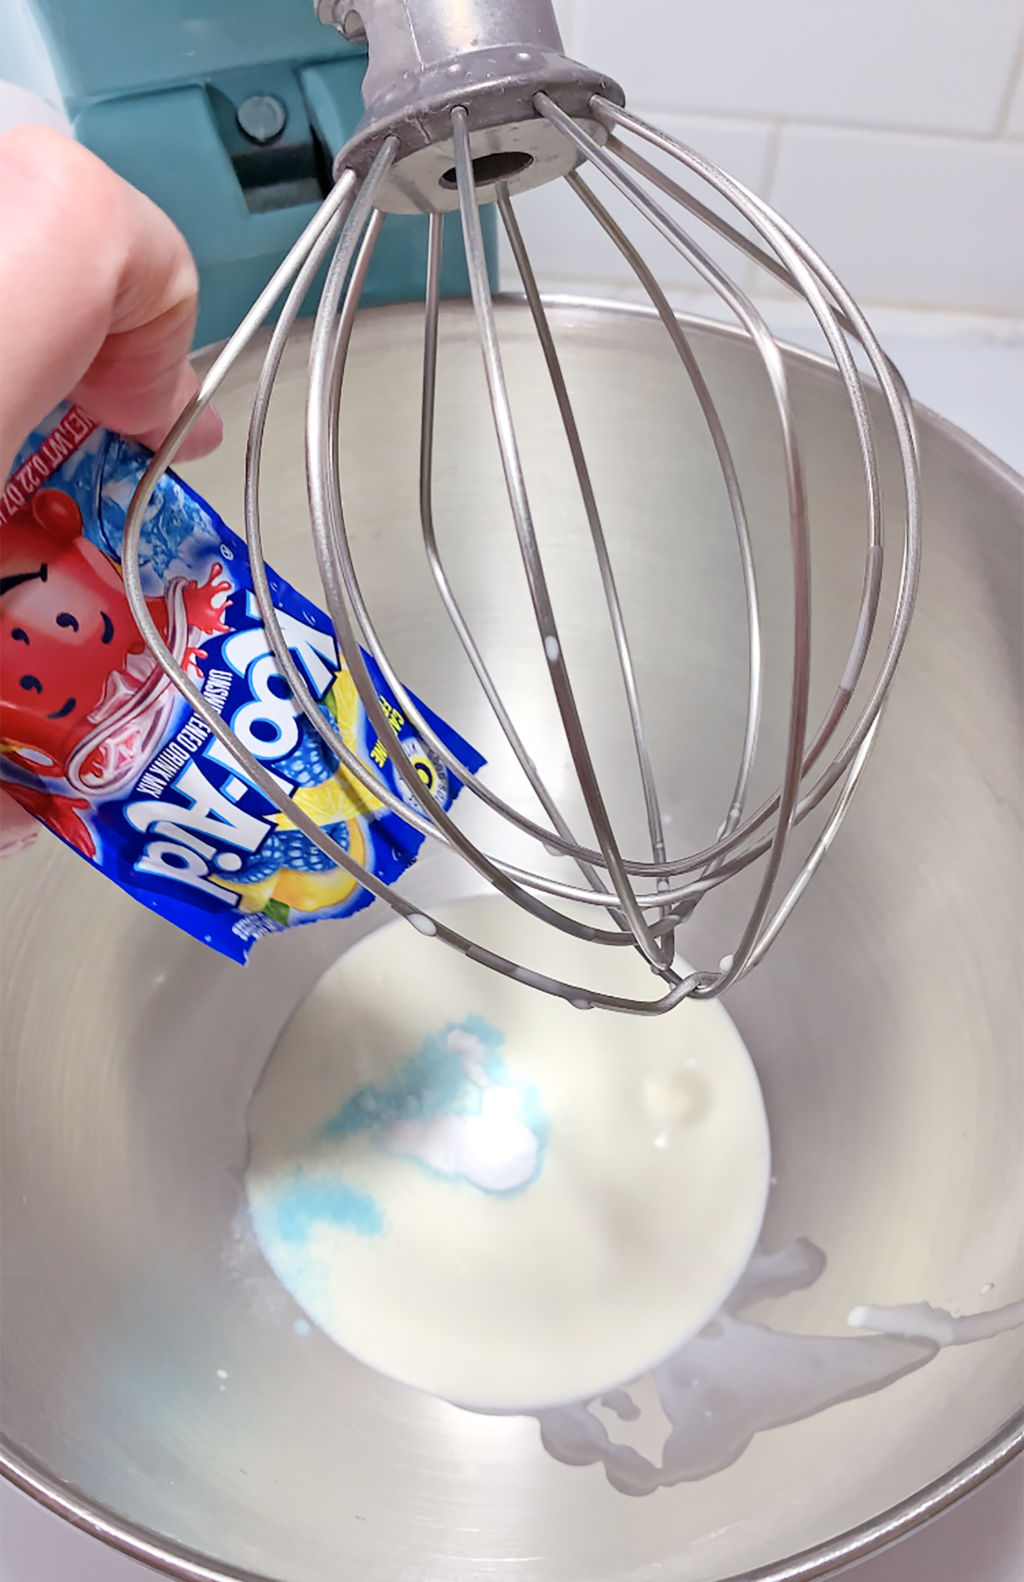 kool-aid packet being poured into large mixing bowl